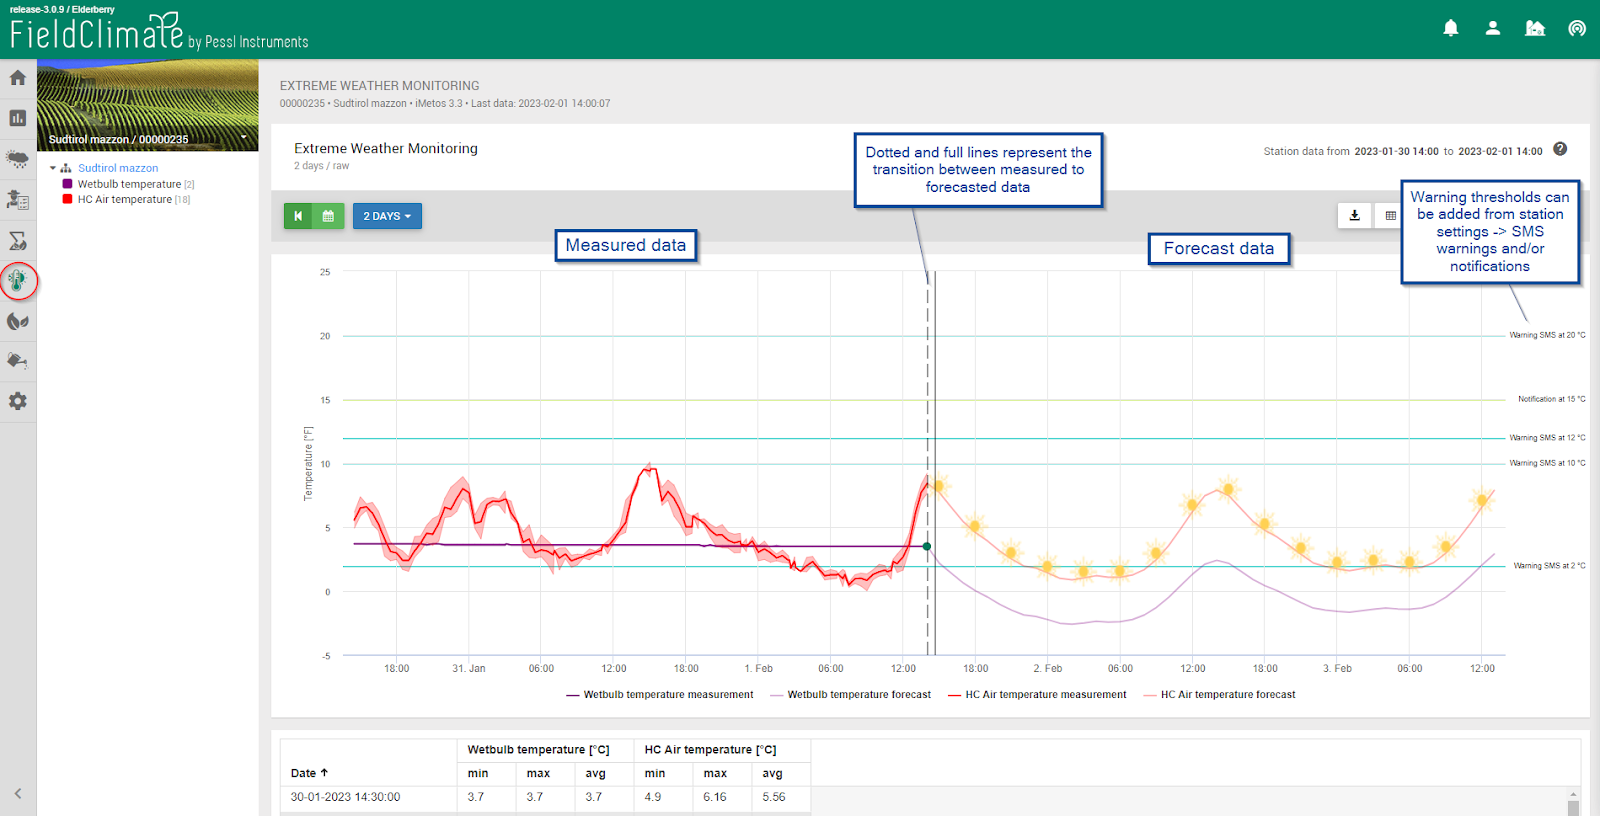 Fieldclimate manual_Extreme weather monitoring page